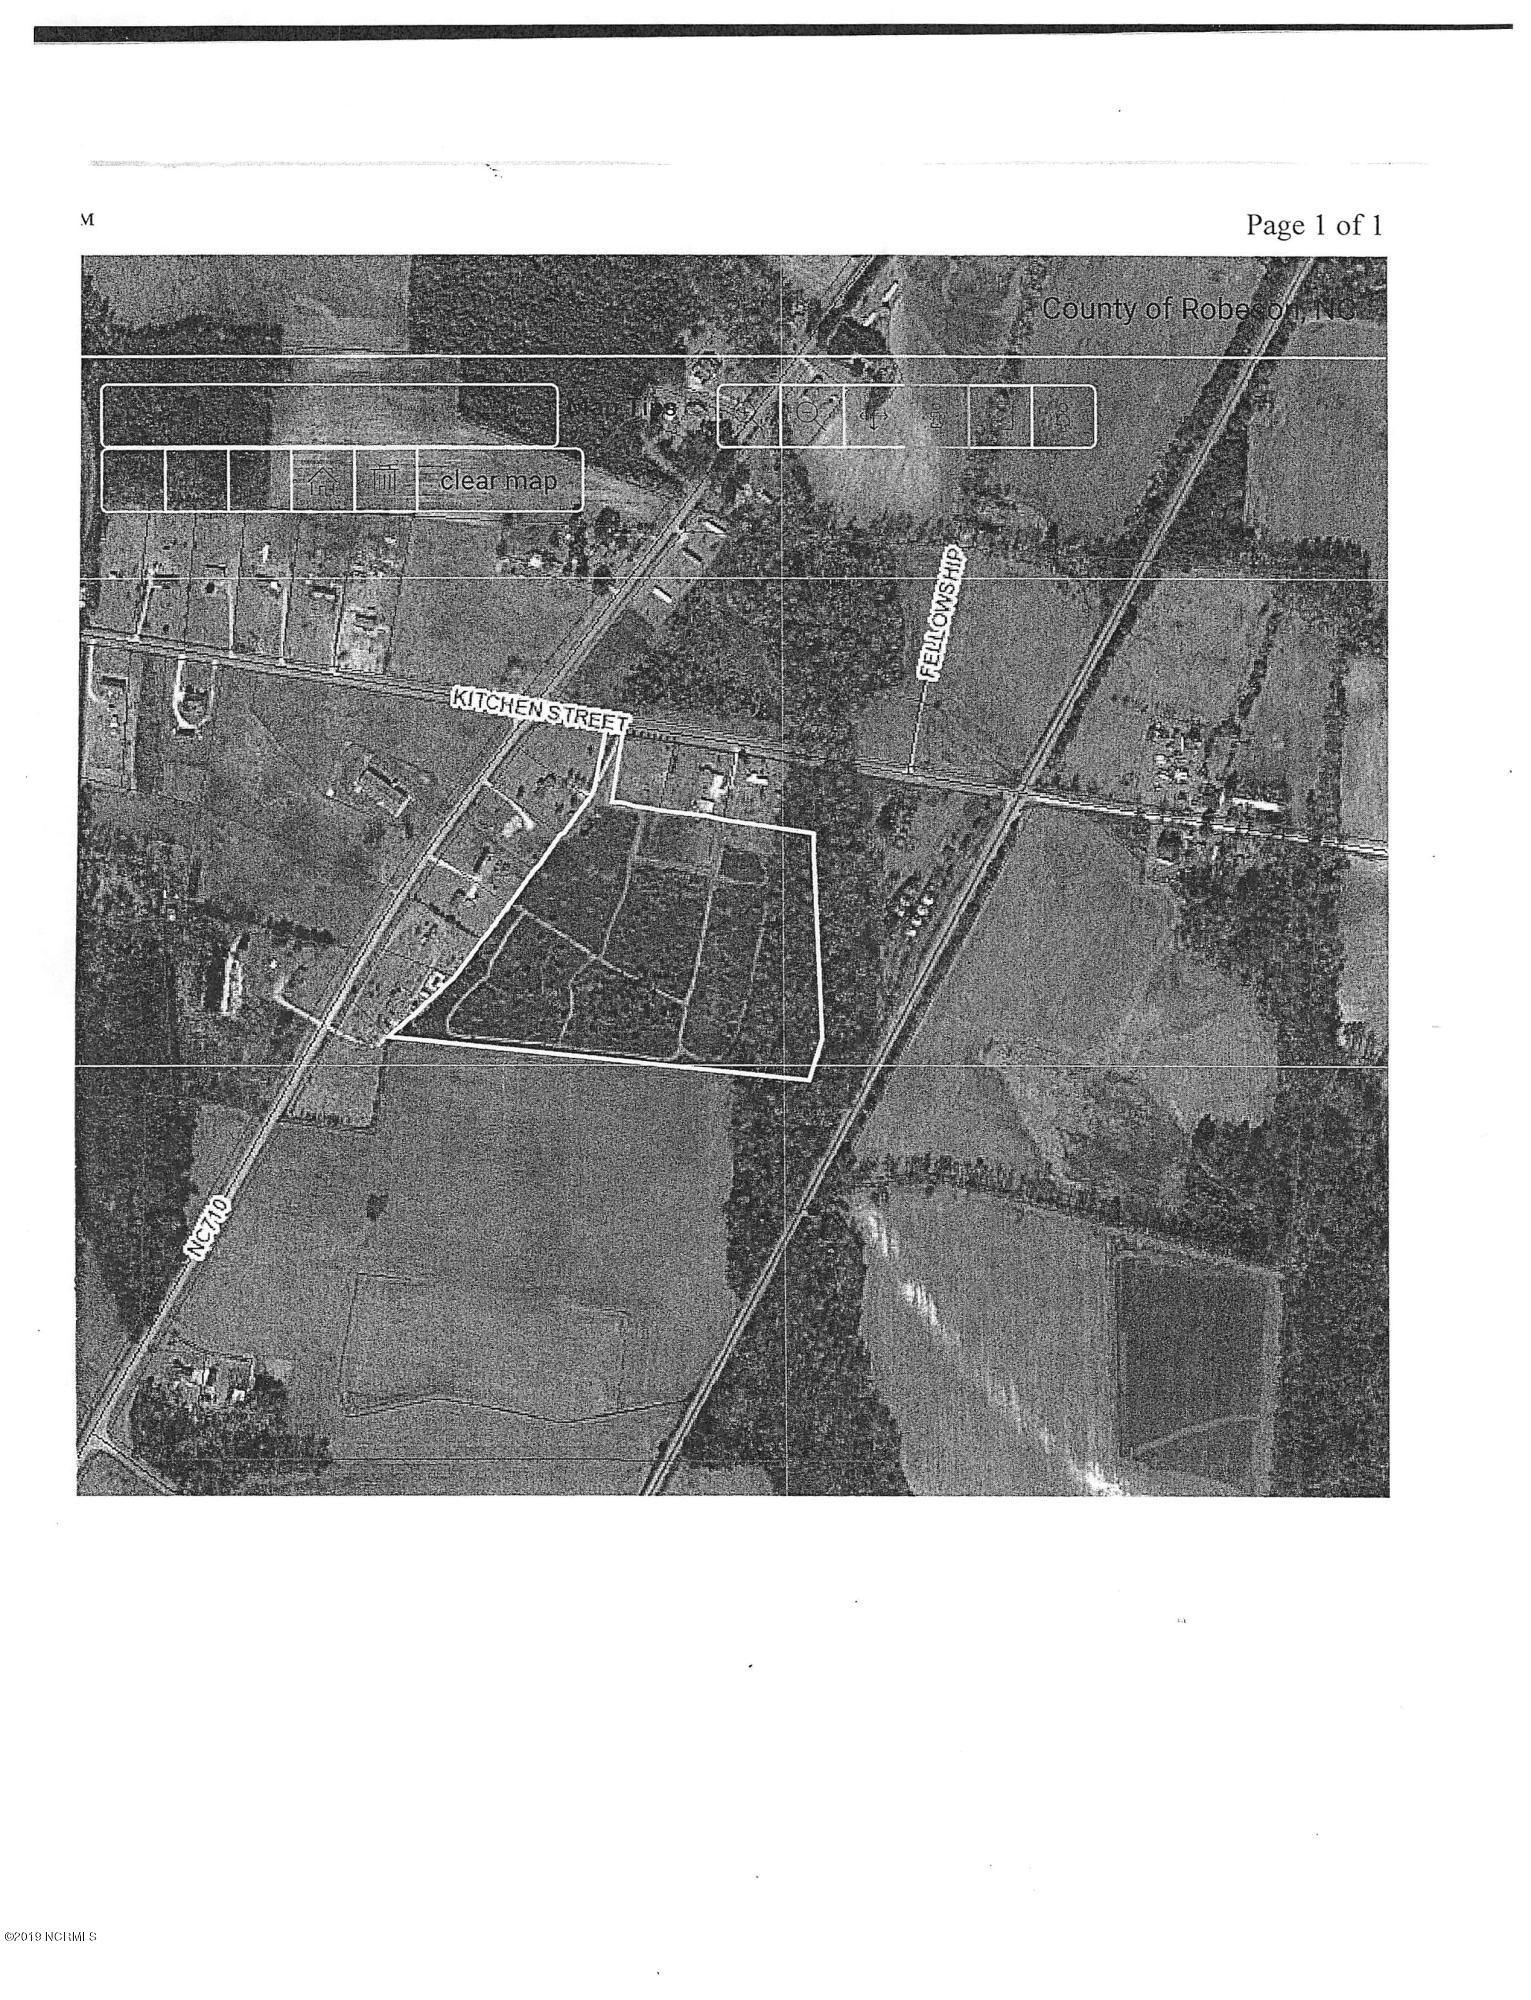 Kitchen St. Rd. aerial GIS Map